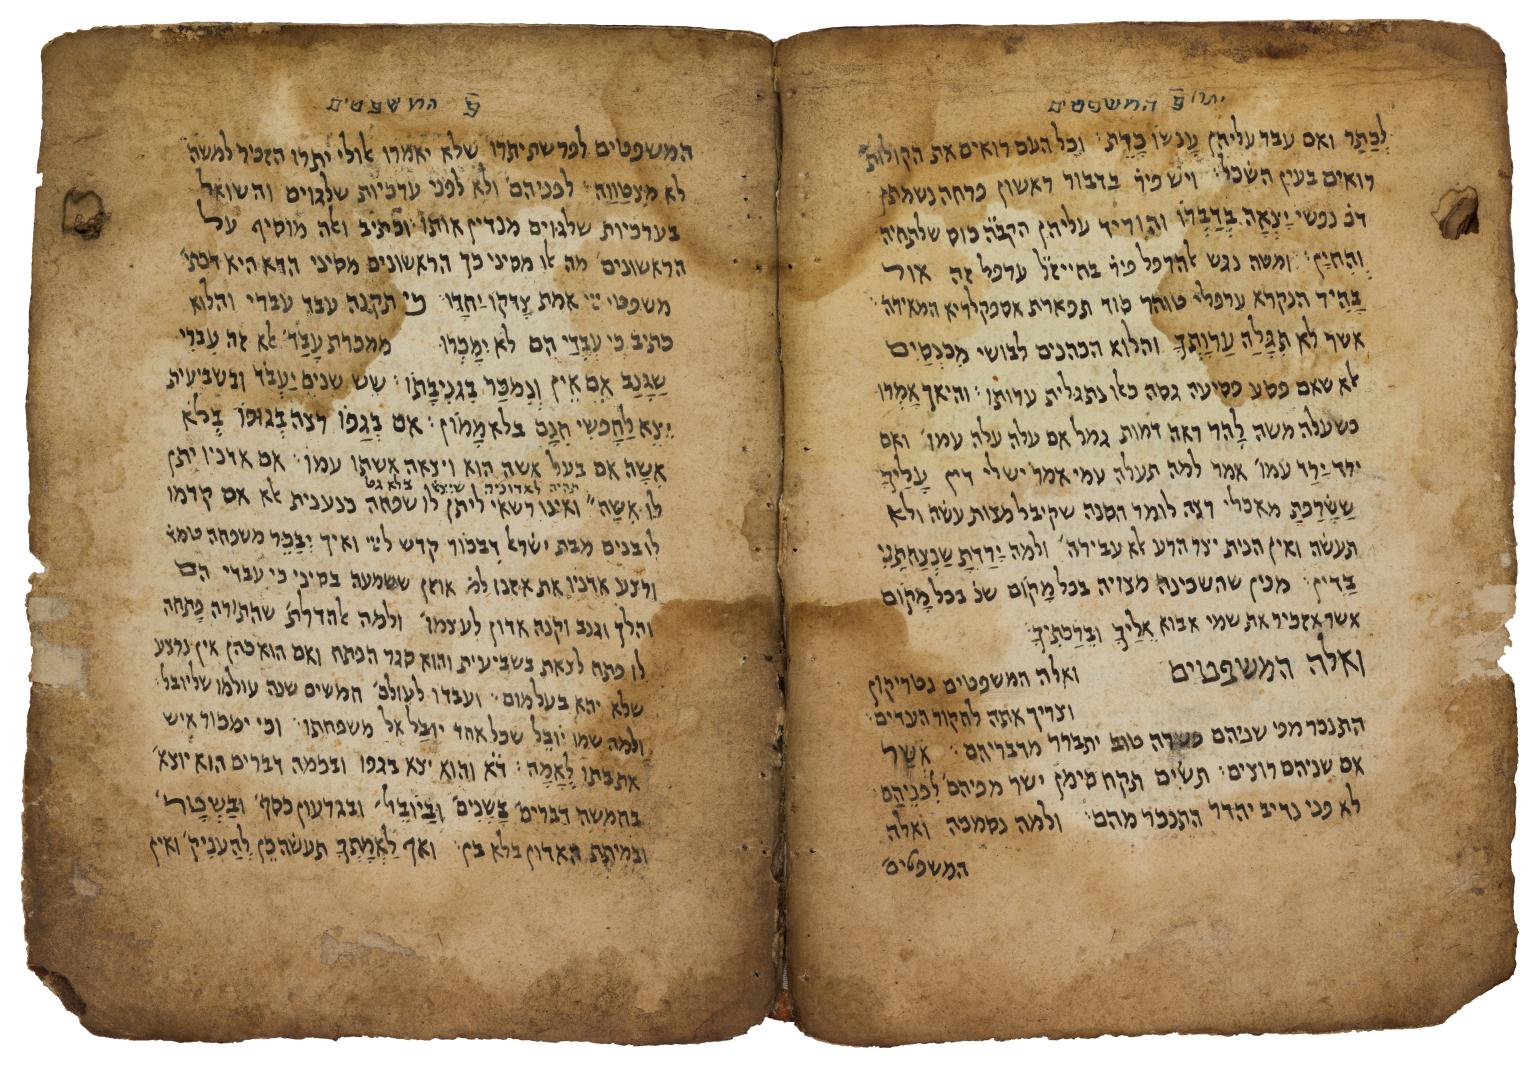 Facing-page manuscript with Hebrew text. 